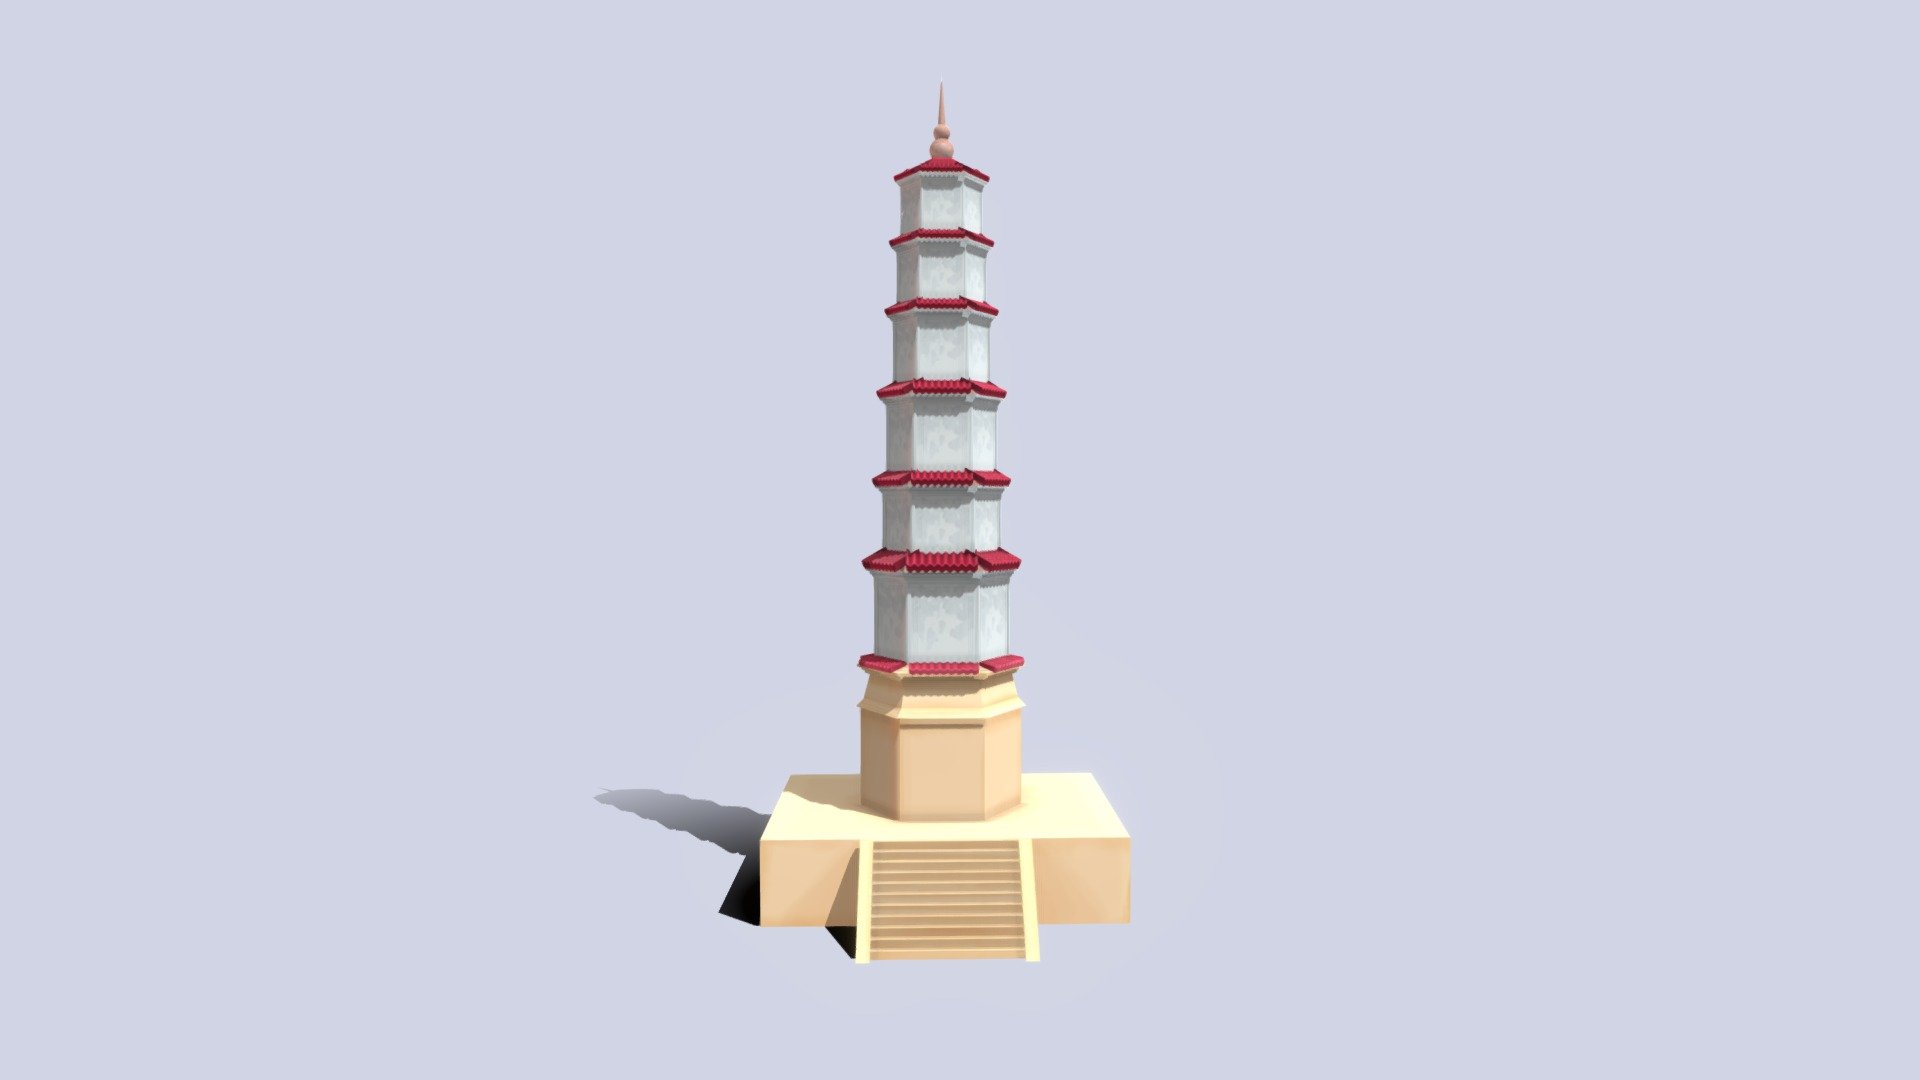 3D model I made for my school assignment
Made in 3DS Studio Max - Chinese Tower - 3D model by NvMullekom 3d model